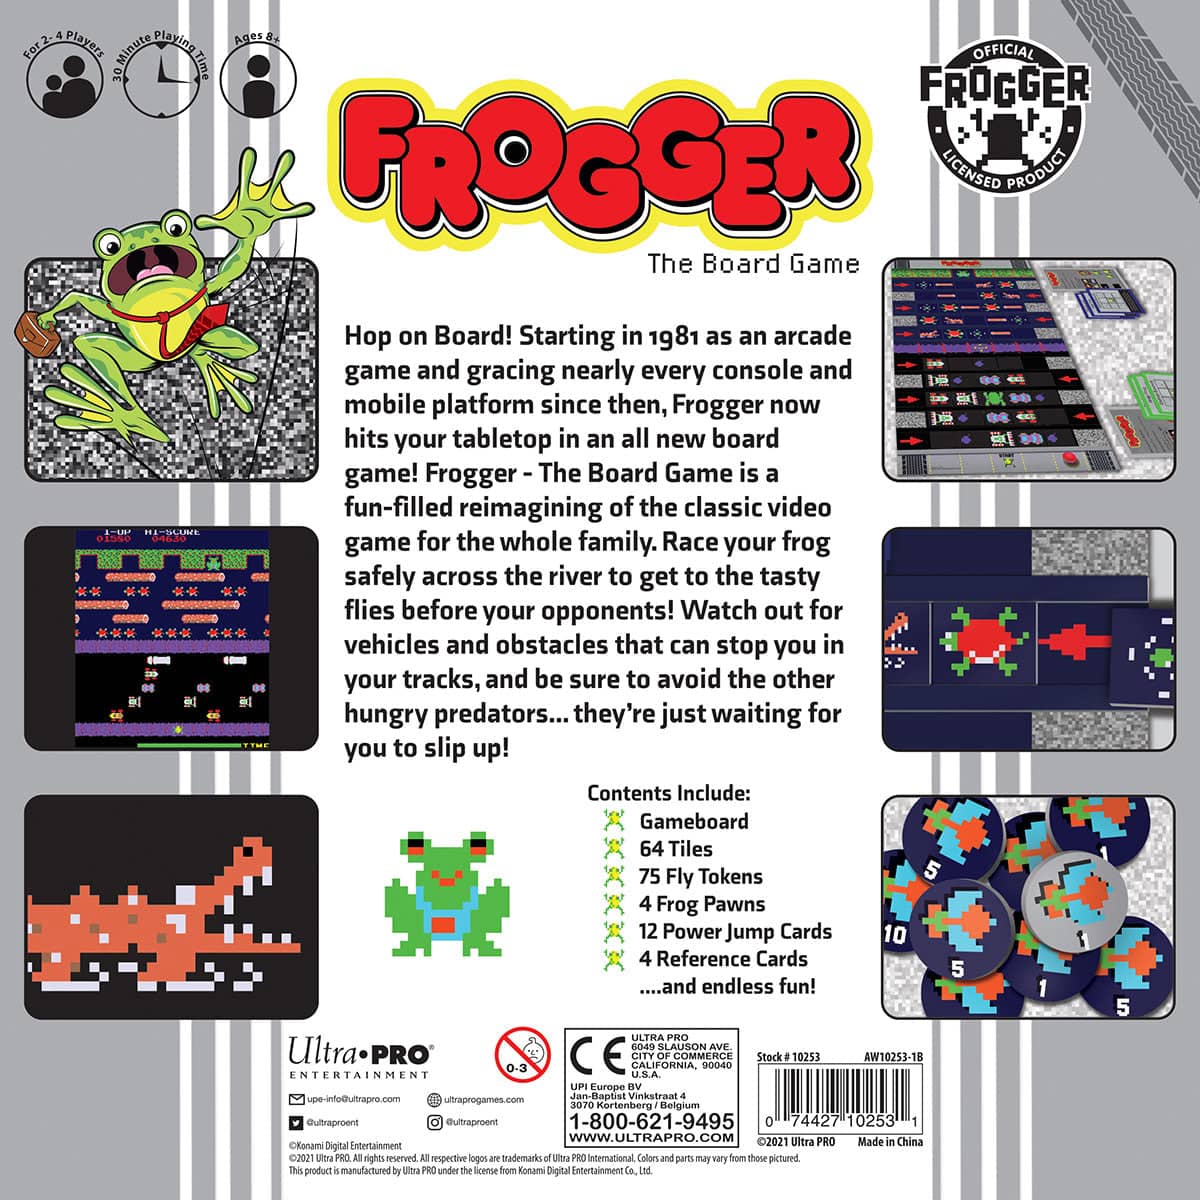 Frogger the Board Game